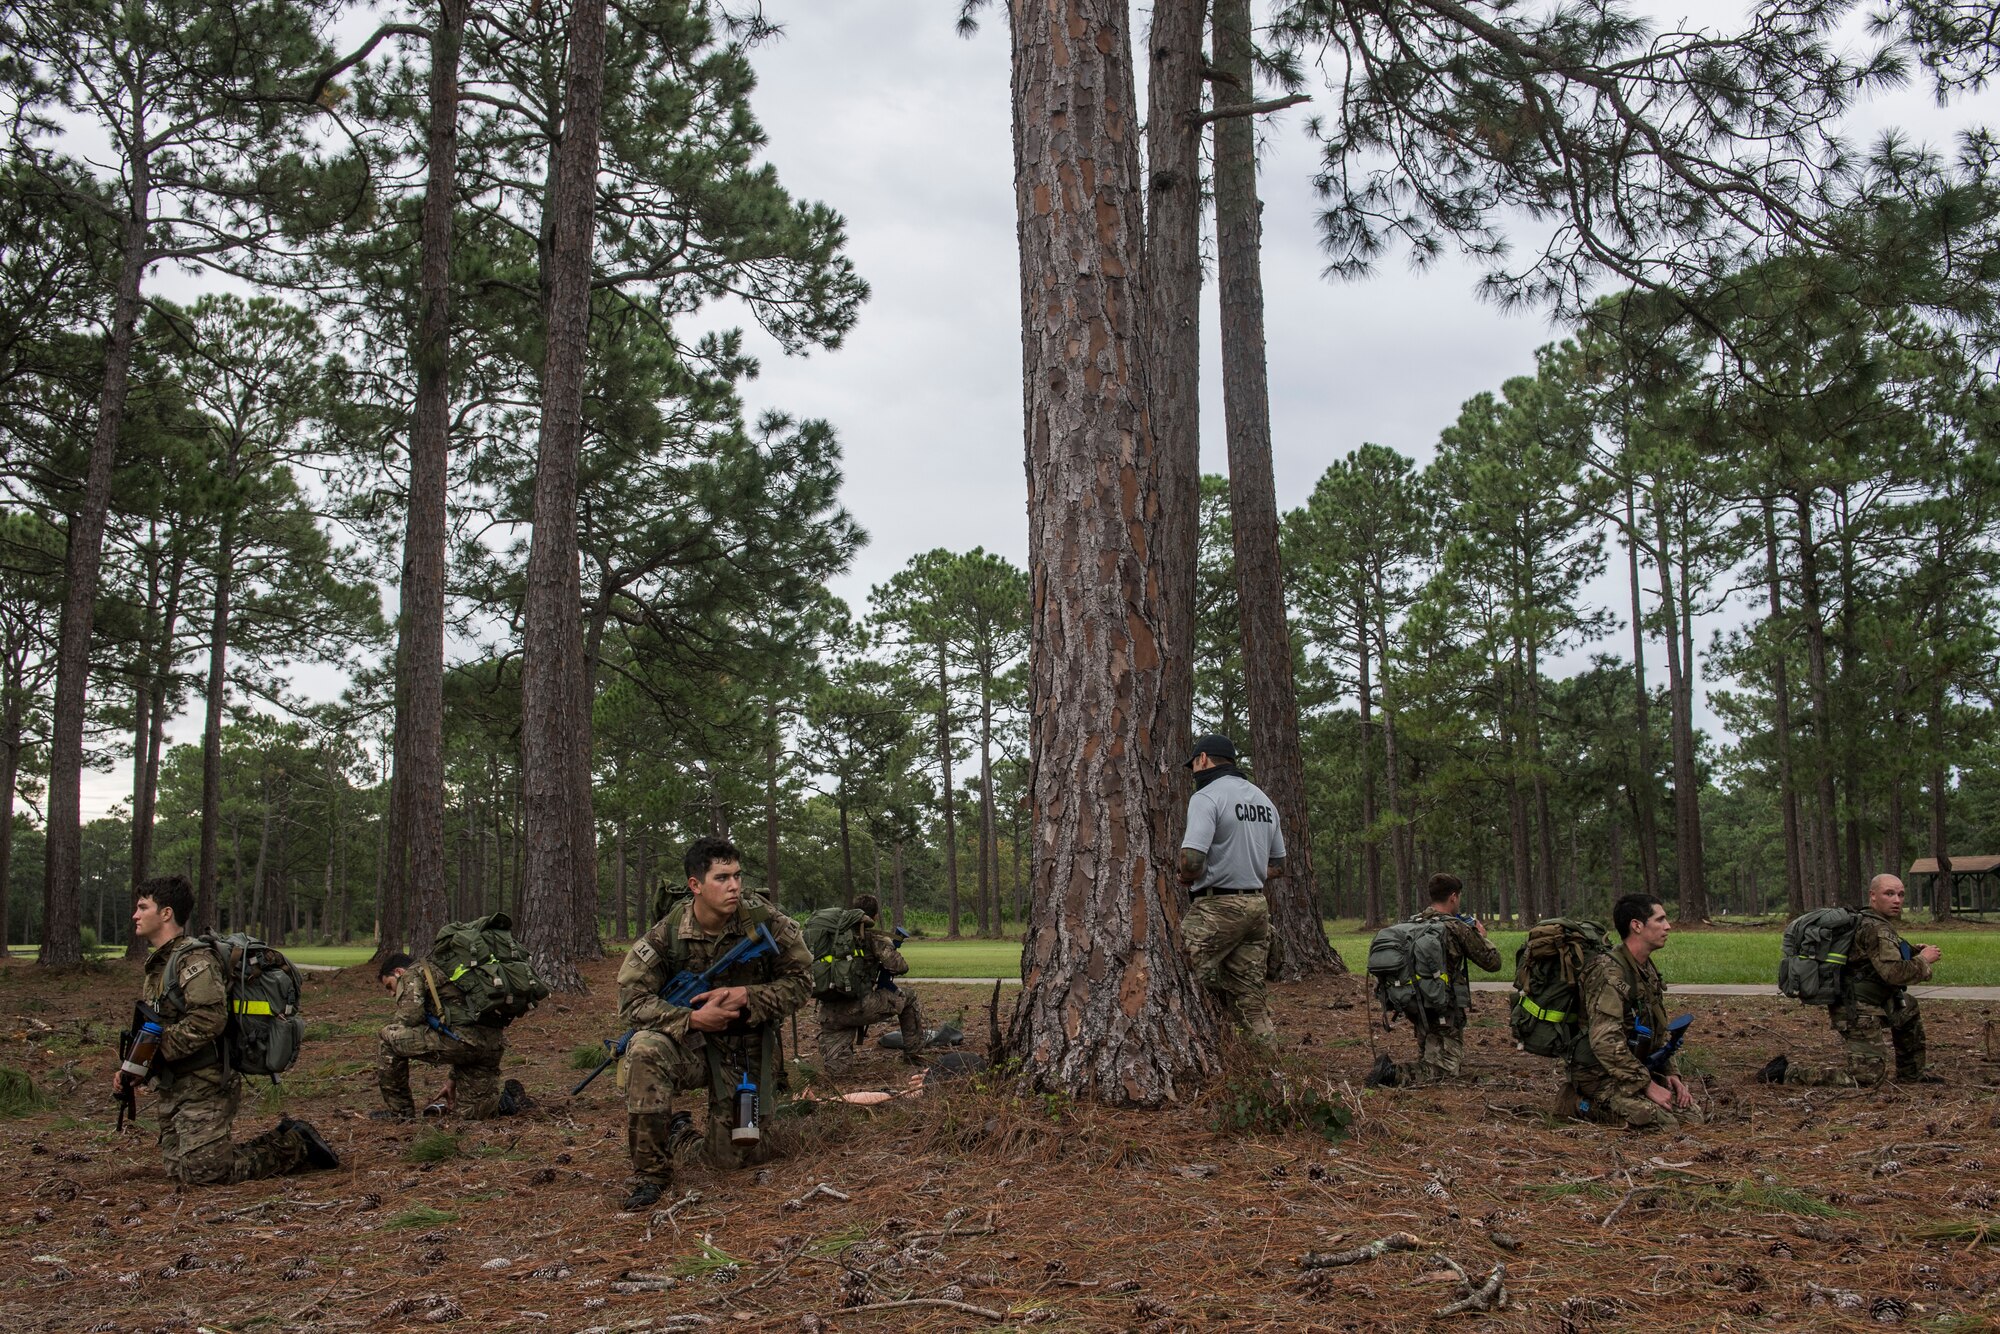 Special Tactics tactical air control party candidates in camo and gear kneel around a very thick tree in a circle facing out looking for threats.